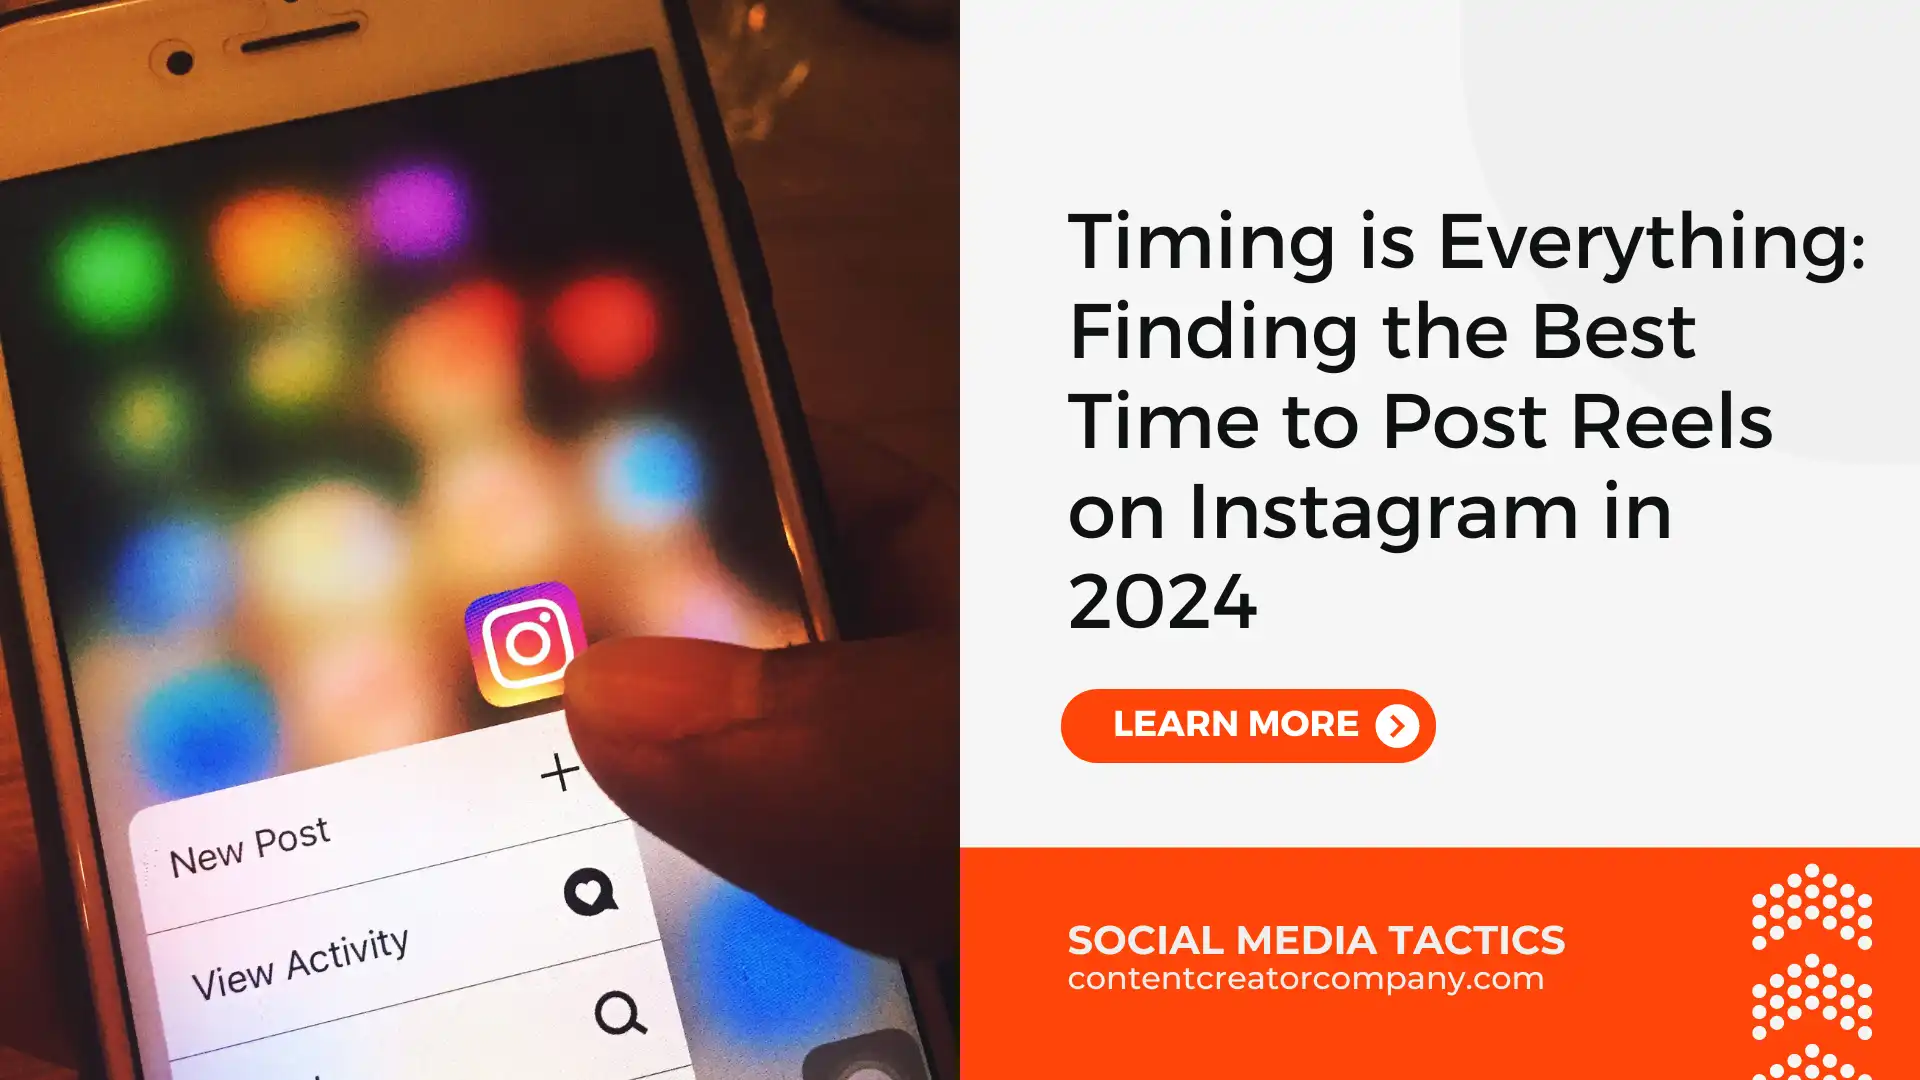 Timing is Everything: Finding the Best Time to Post Reels on Instagram in 2024